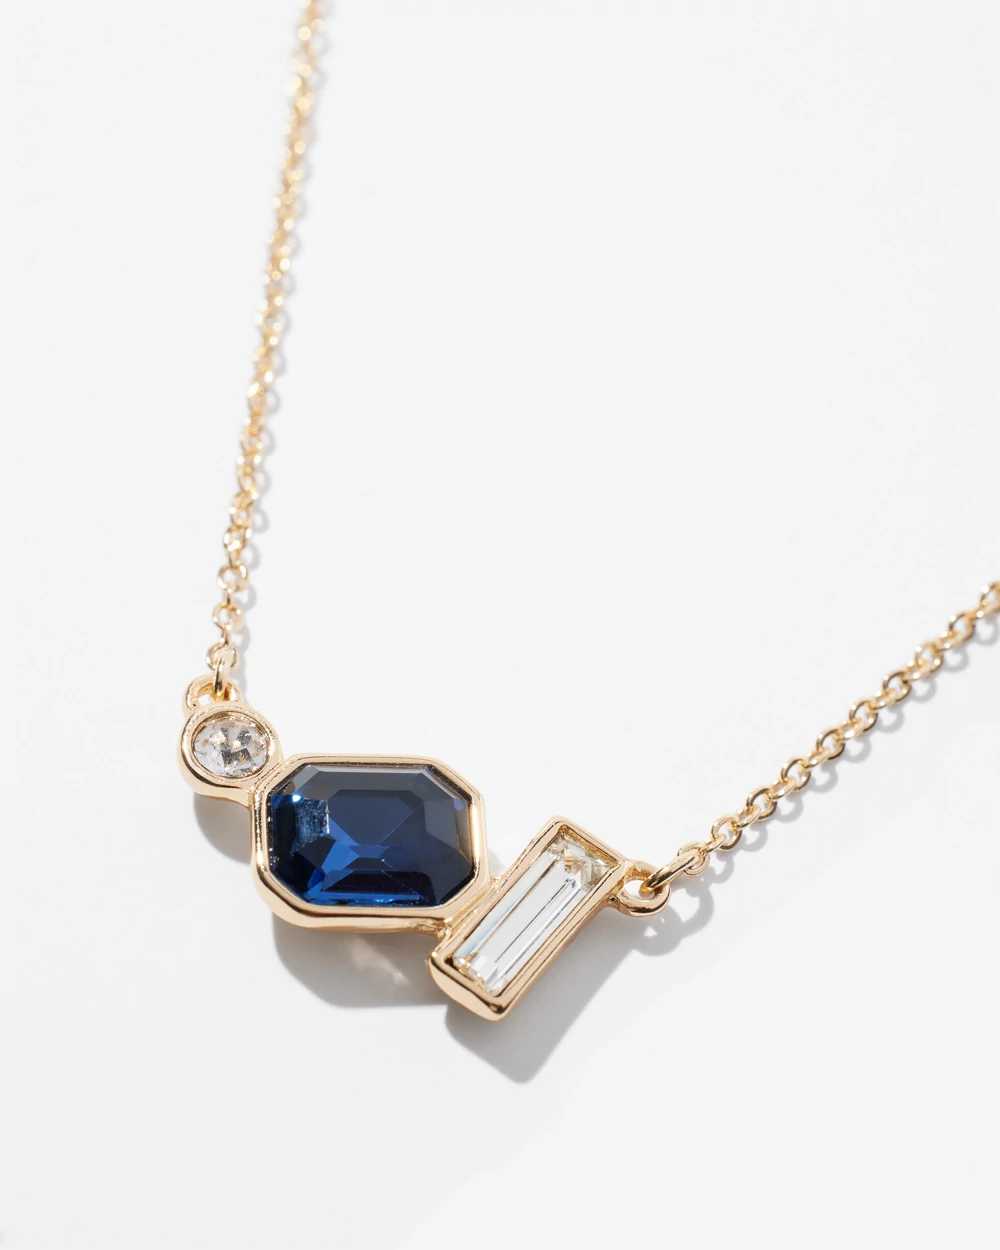 Gold Crystal Dark Blue Pendant Necklace click to view larger image.